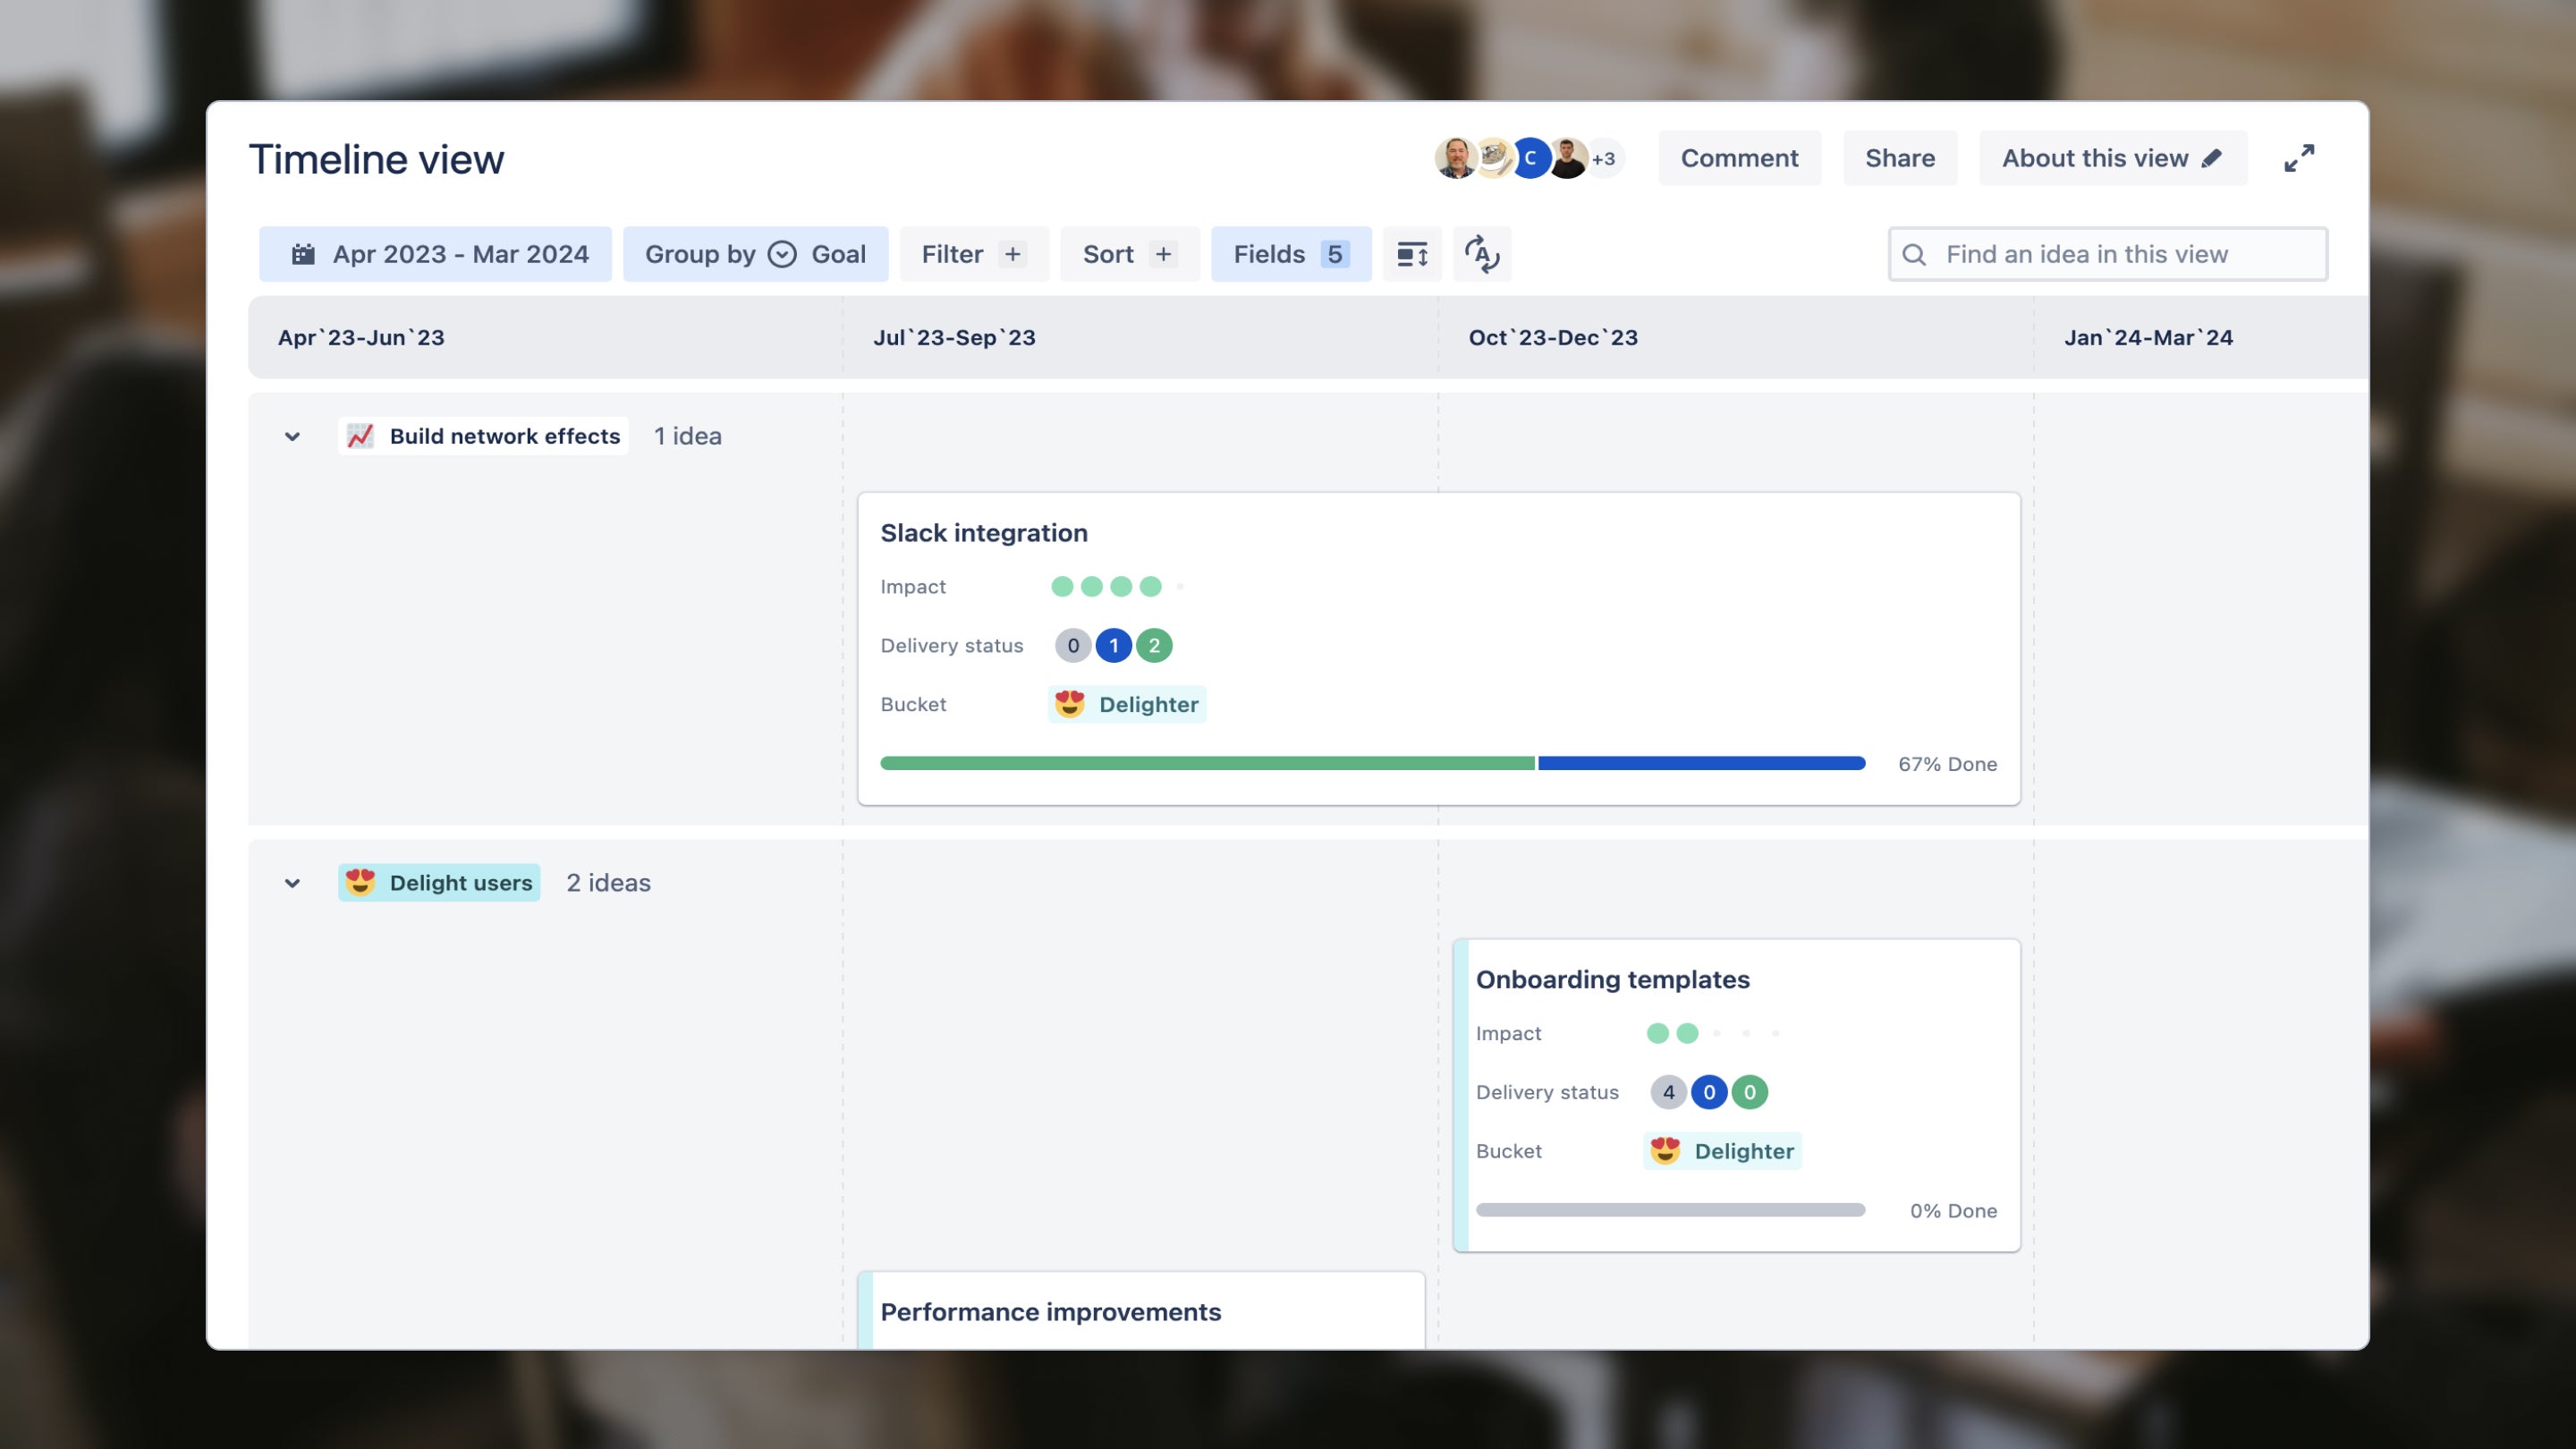 Picture of the Jira interface for Schneider Electric